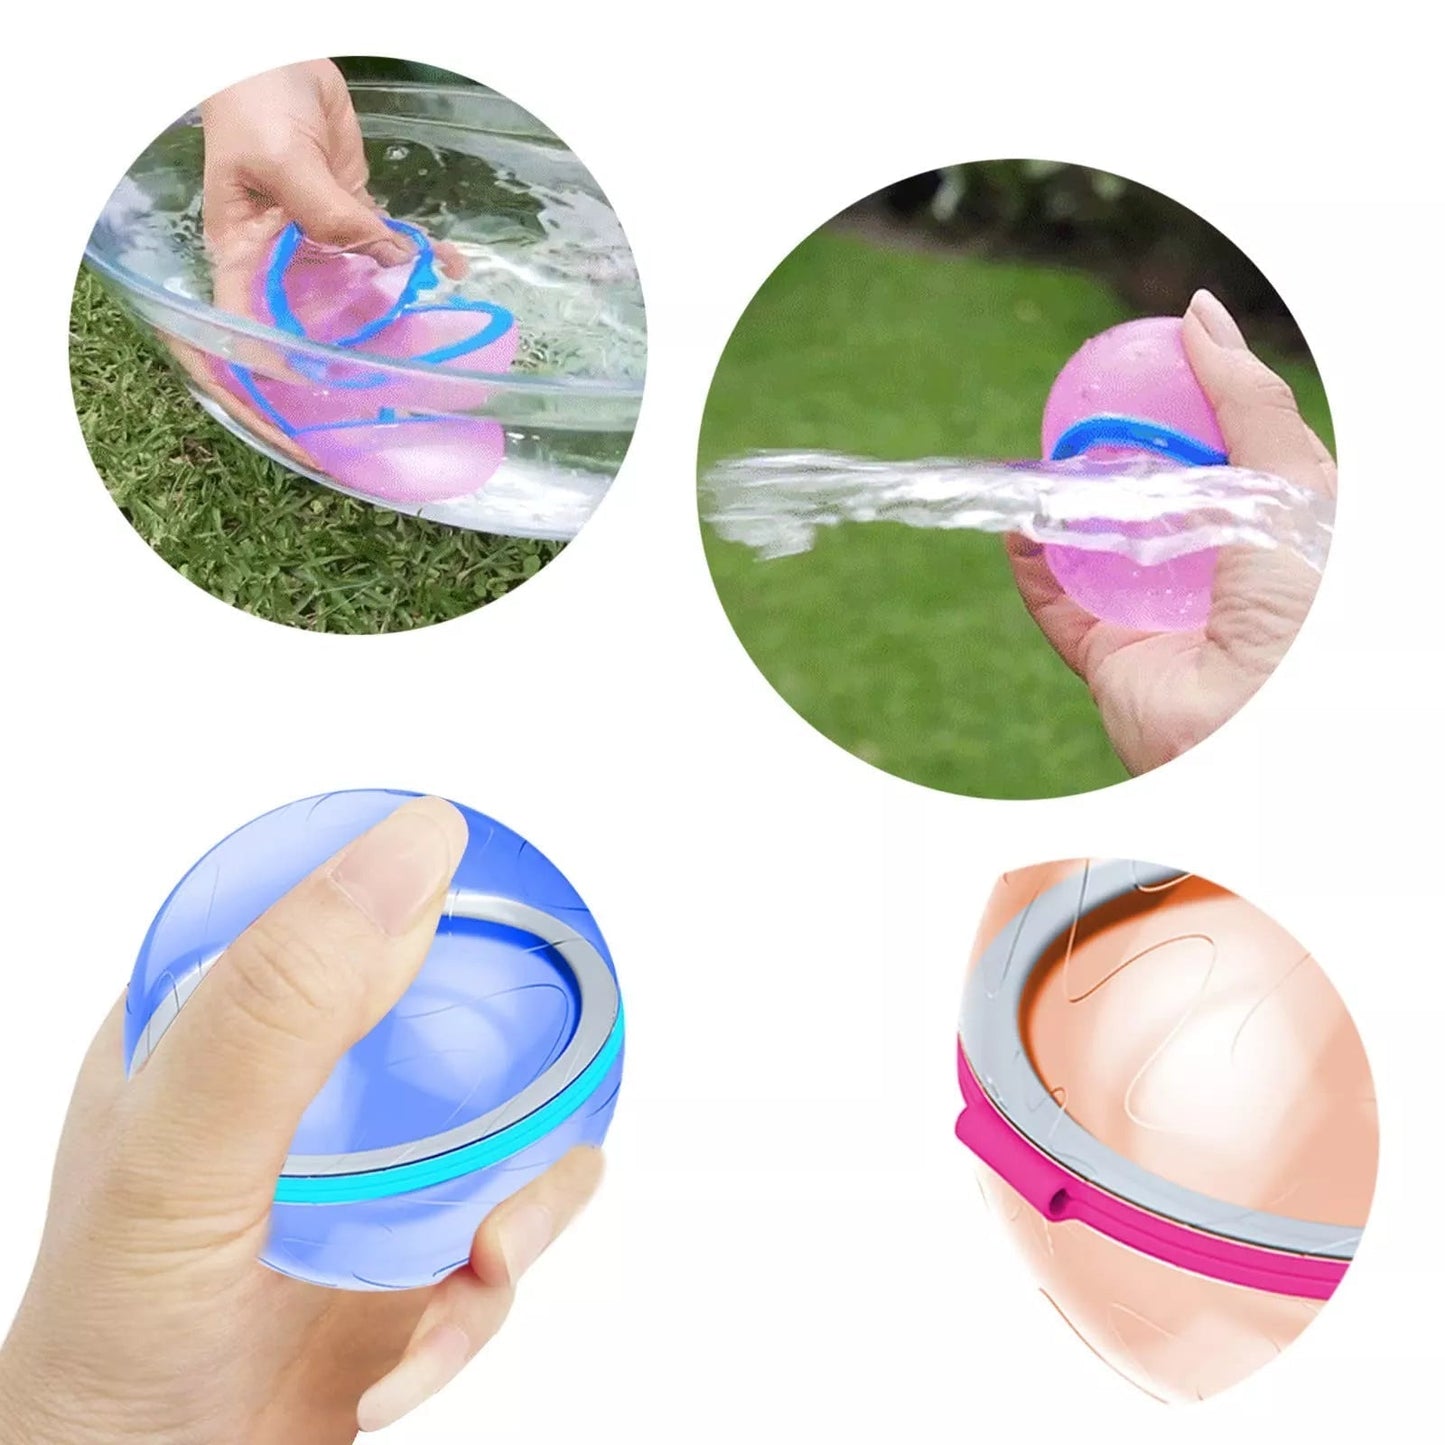 A reusable water balloon, quickly fillable with water for children to refill and reuse